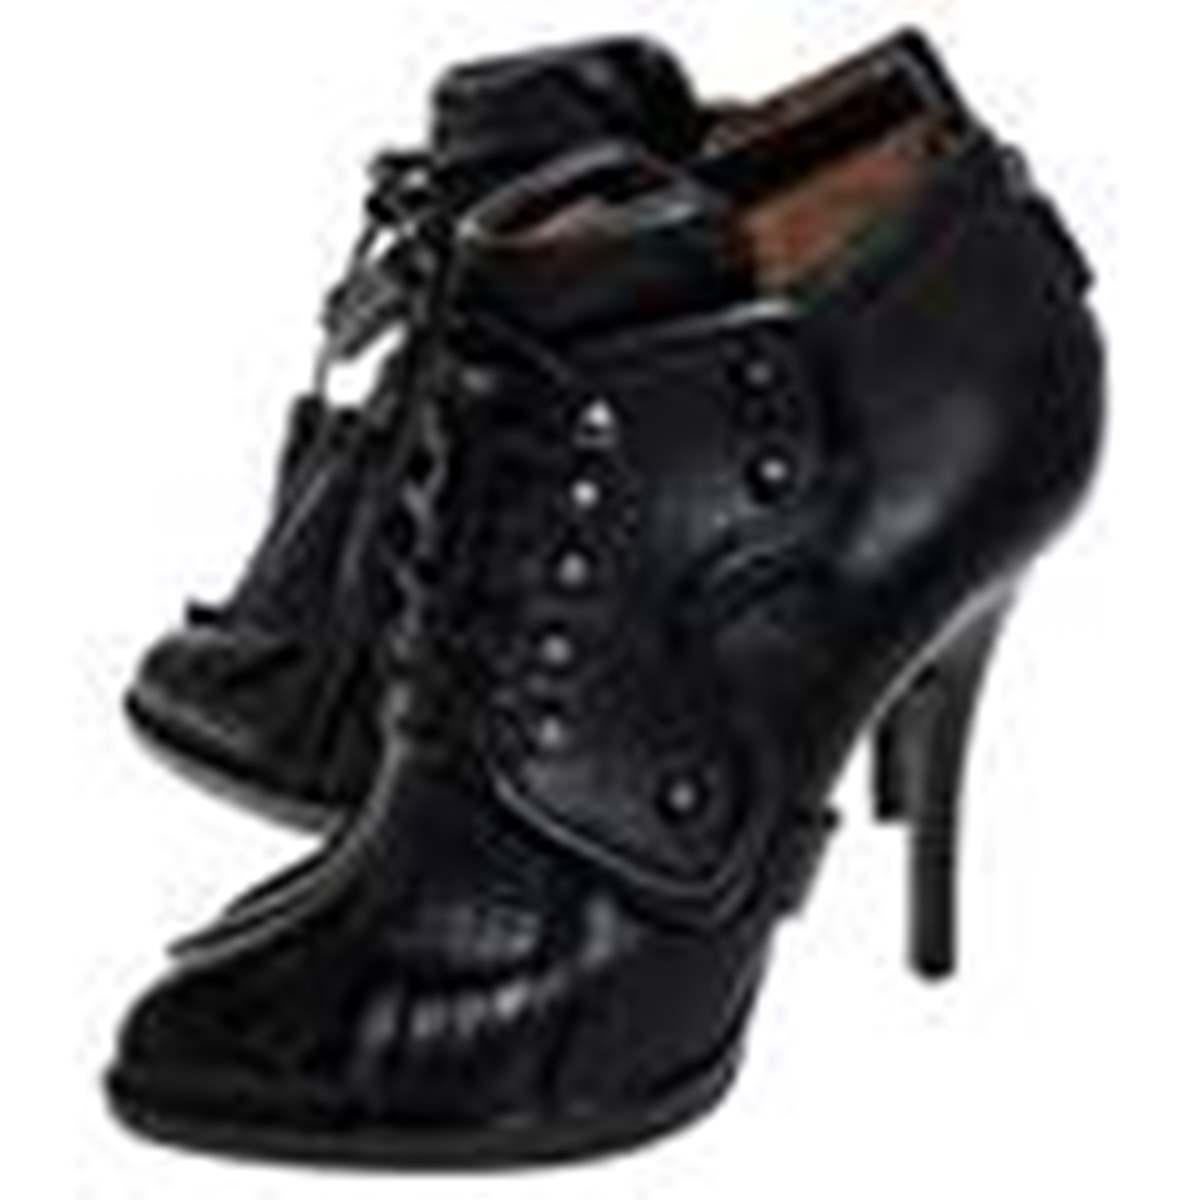 Givenchy Black Leather Fringe Lace Up Booties Size 37 For Sale 16